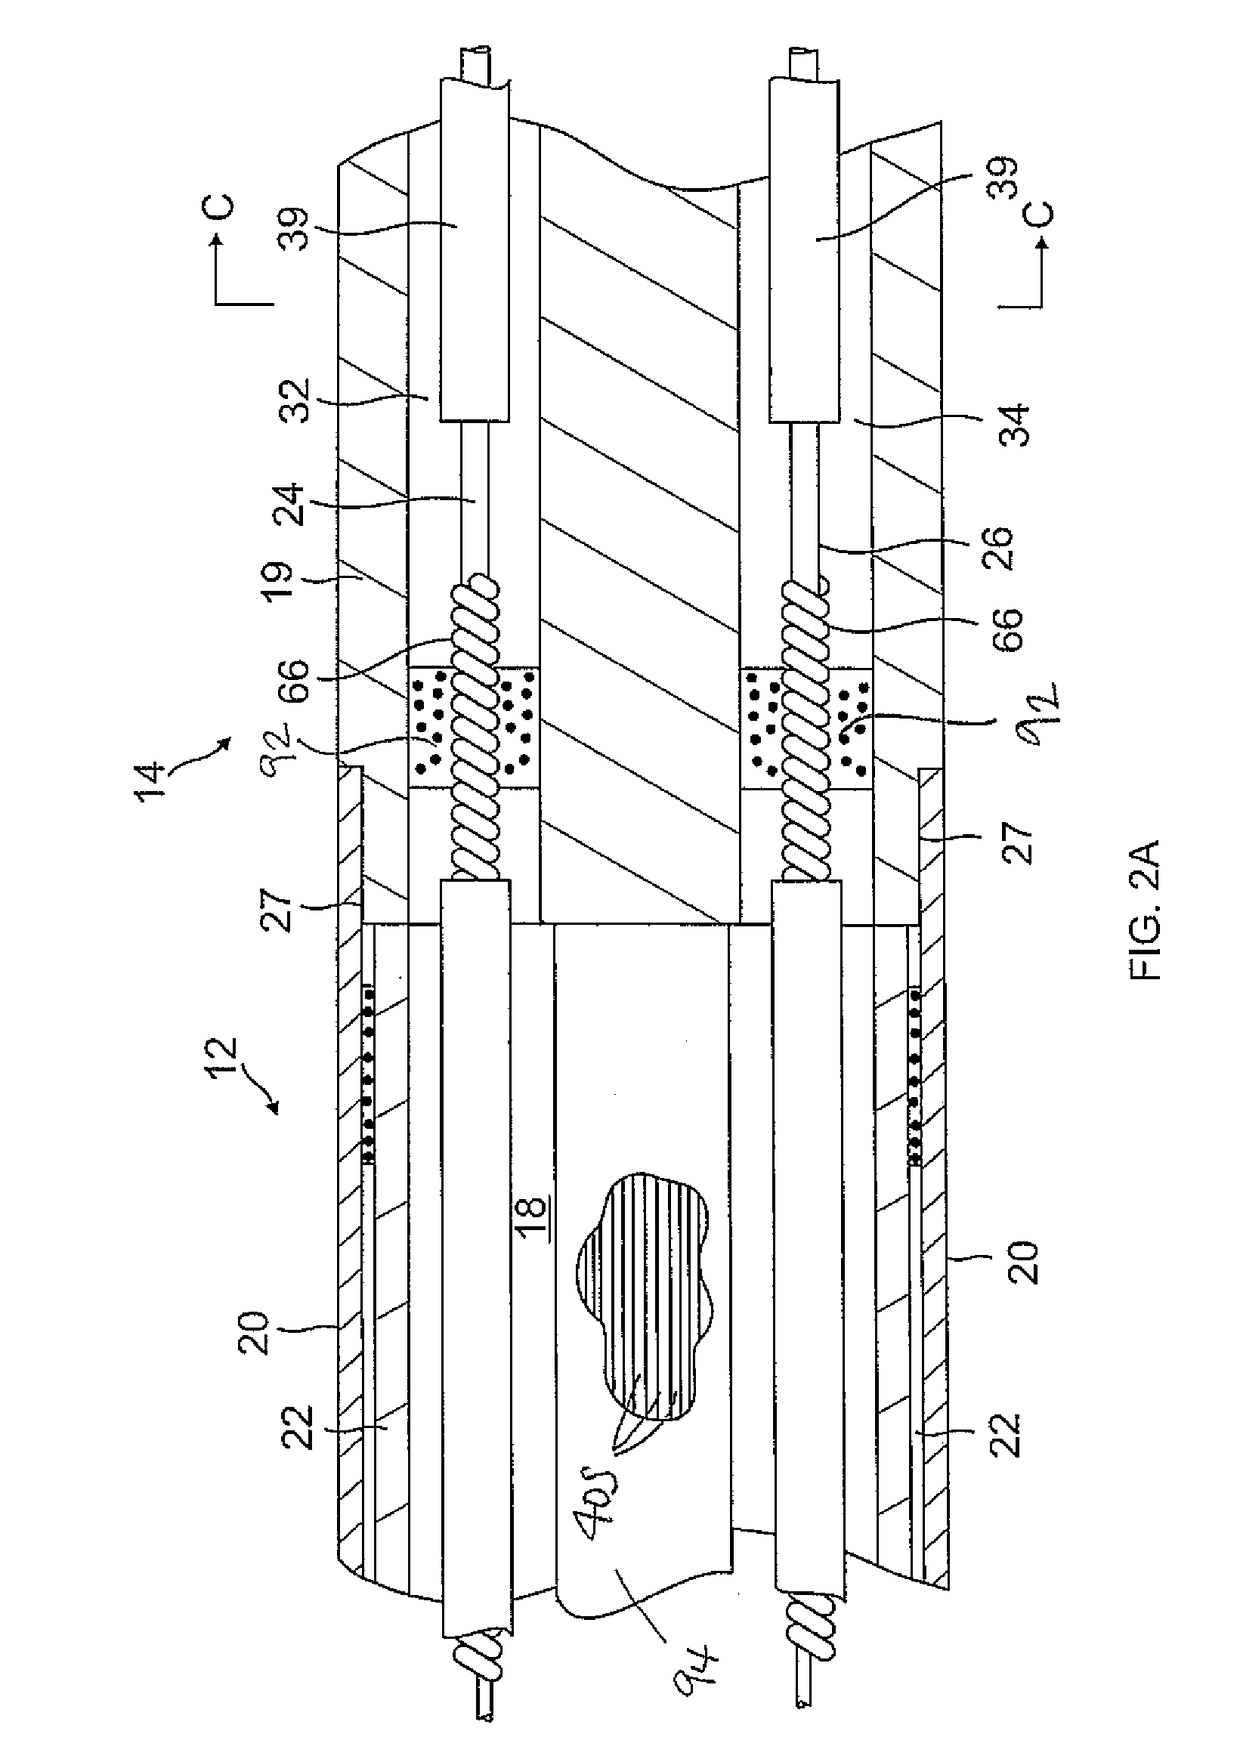 Catheter having closed loop array with in-plane linear electrode portion